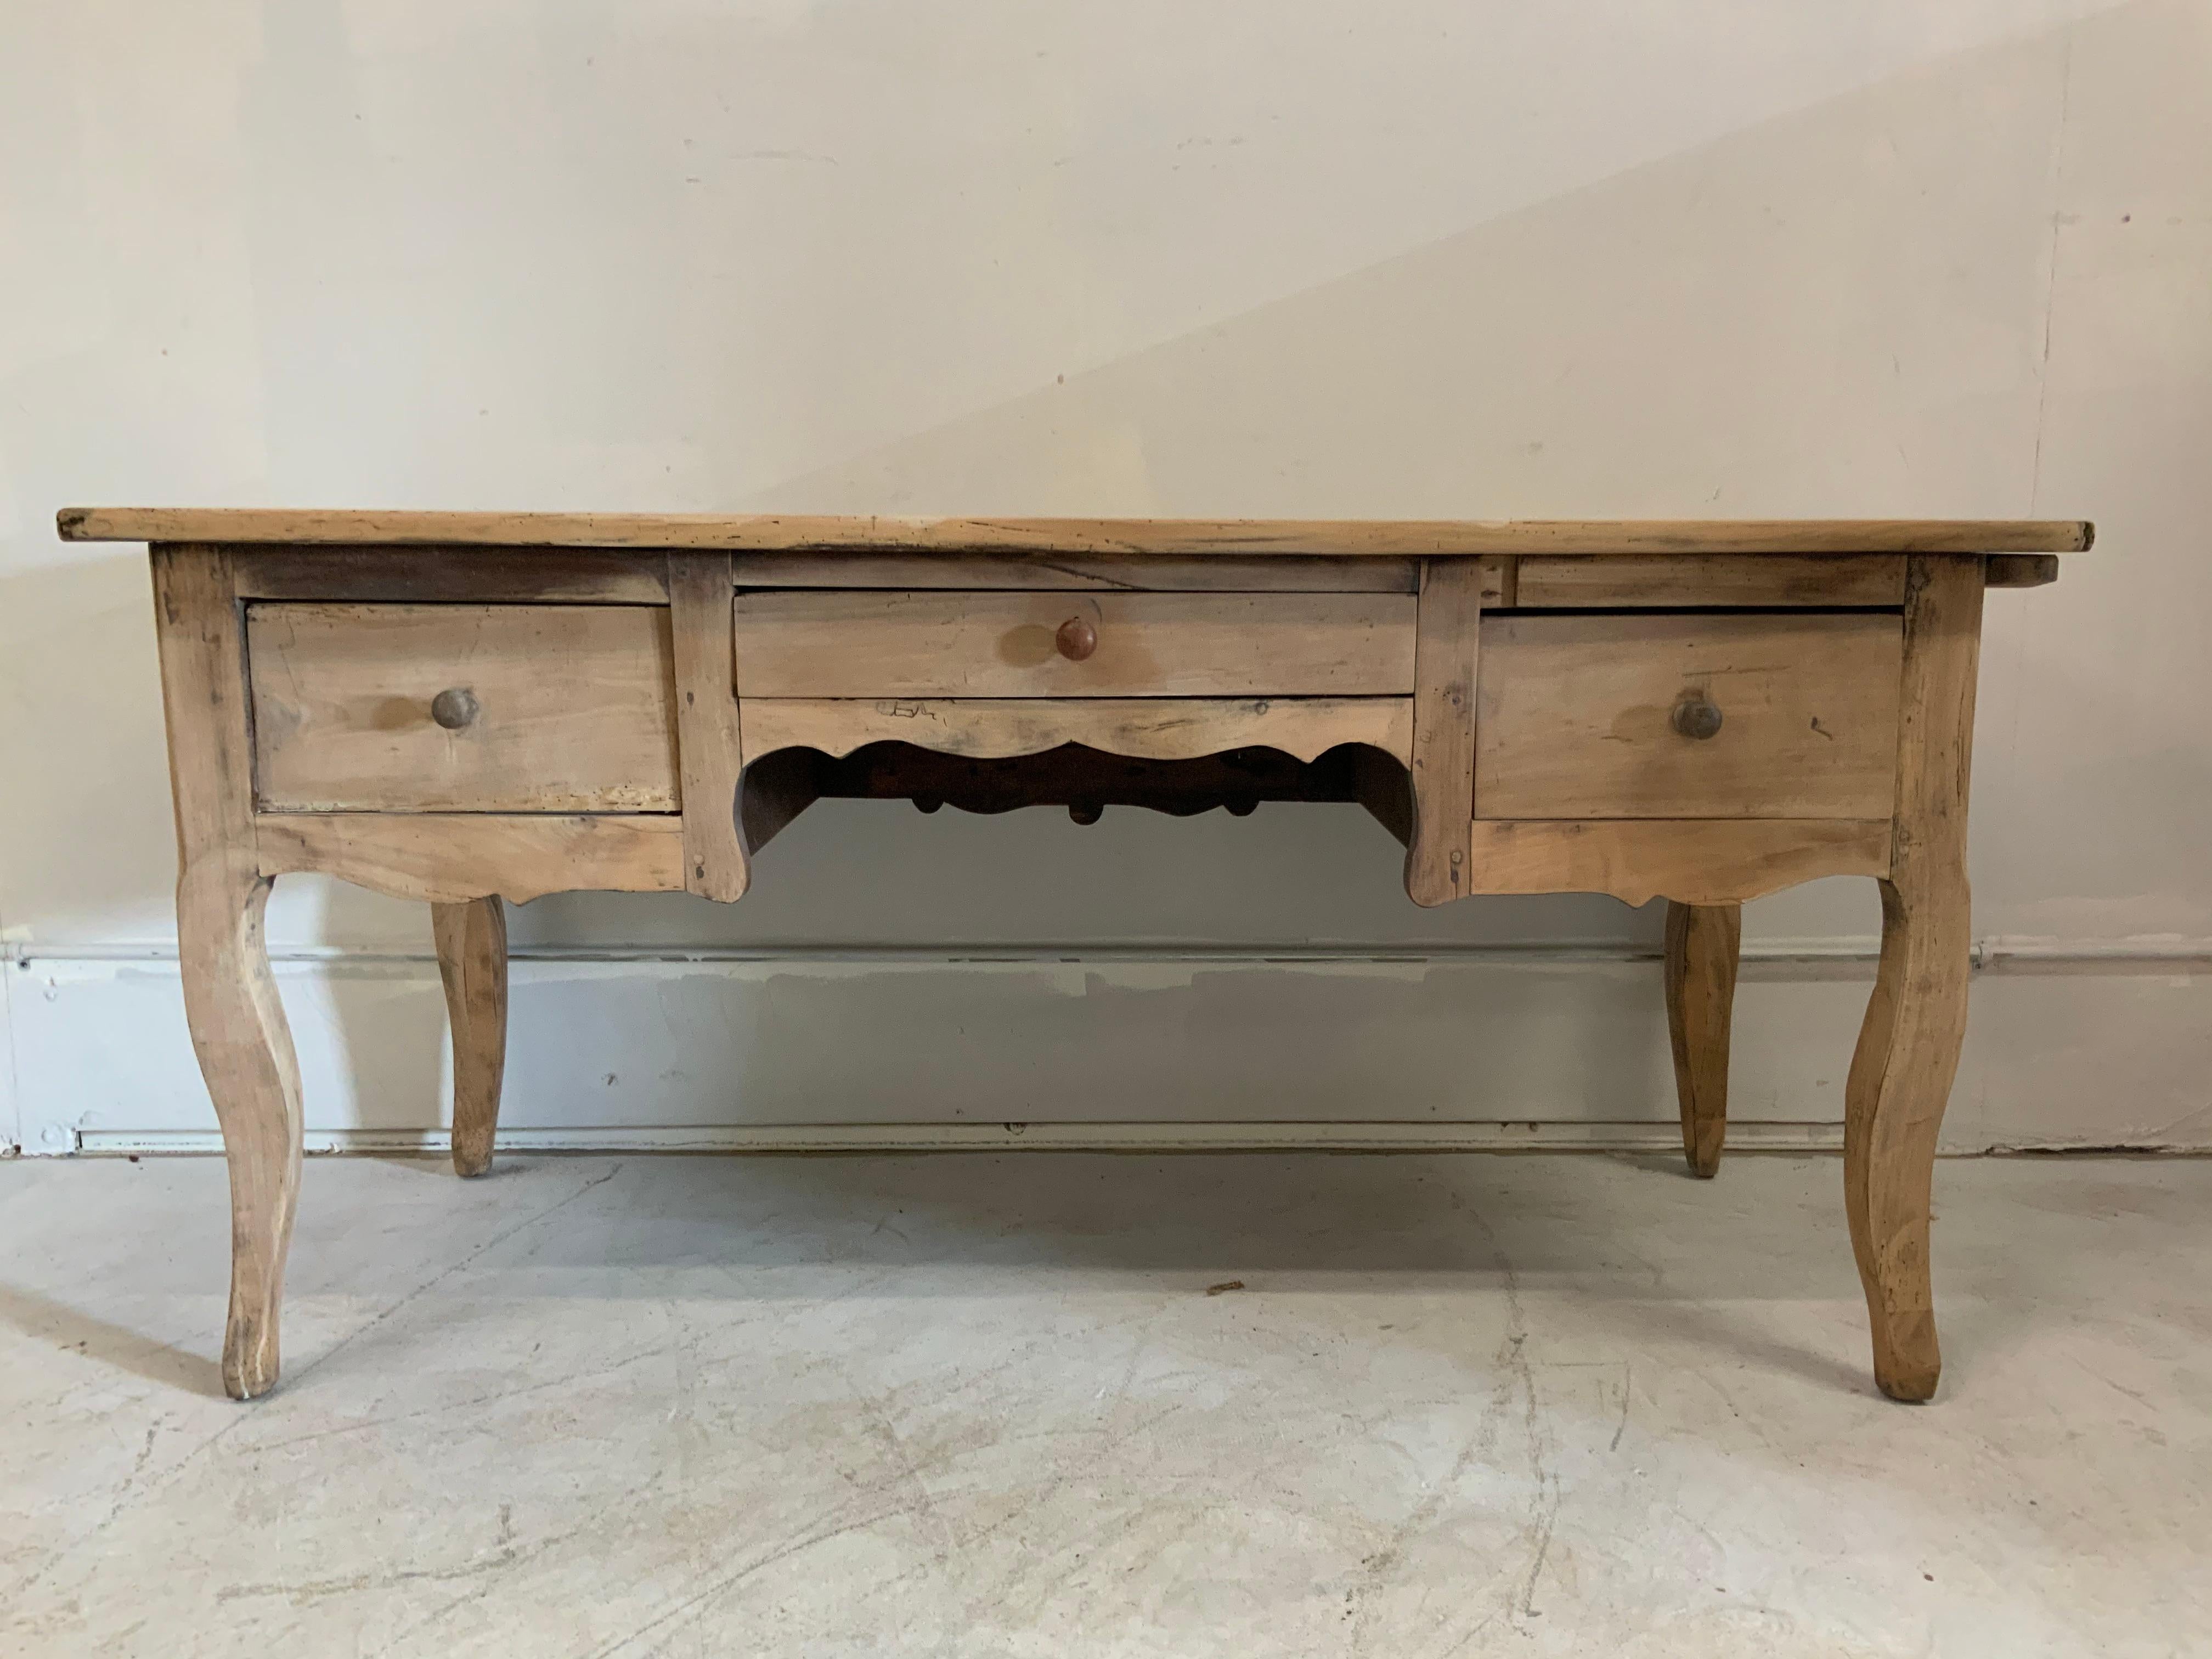 French farm kitchen table Provincial style, with on side extension (was made to cut the baguette bread). This table in walnut wood has 3 drawers on one side. And comes from the South of France. Extension size: 16